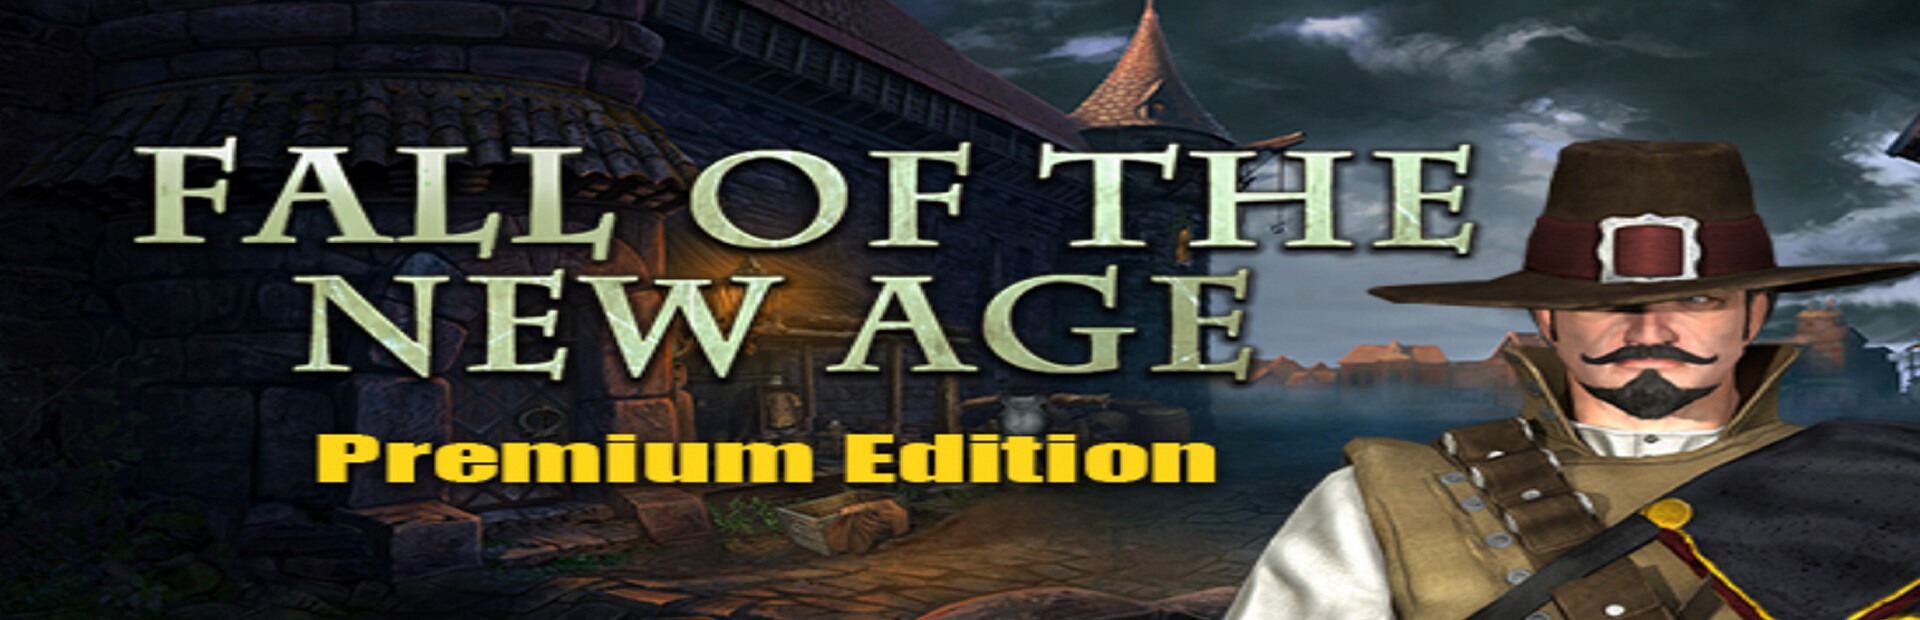 Fall of the New Age Premium Edition cover image